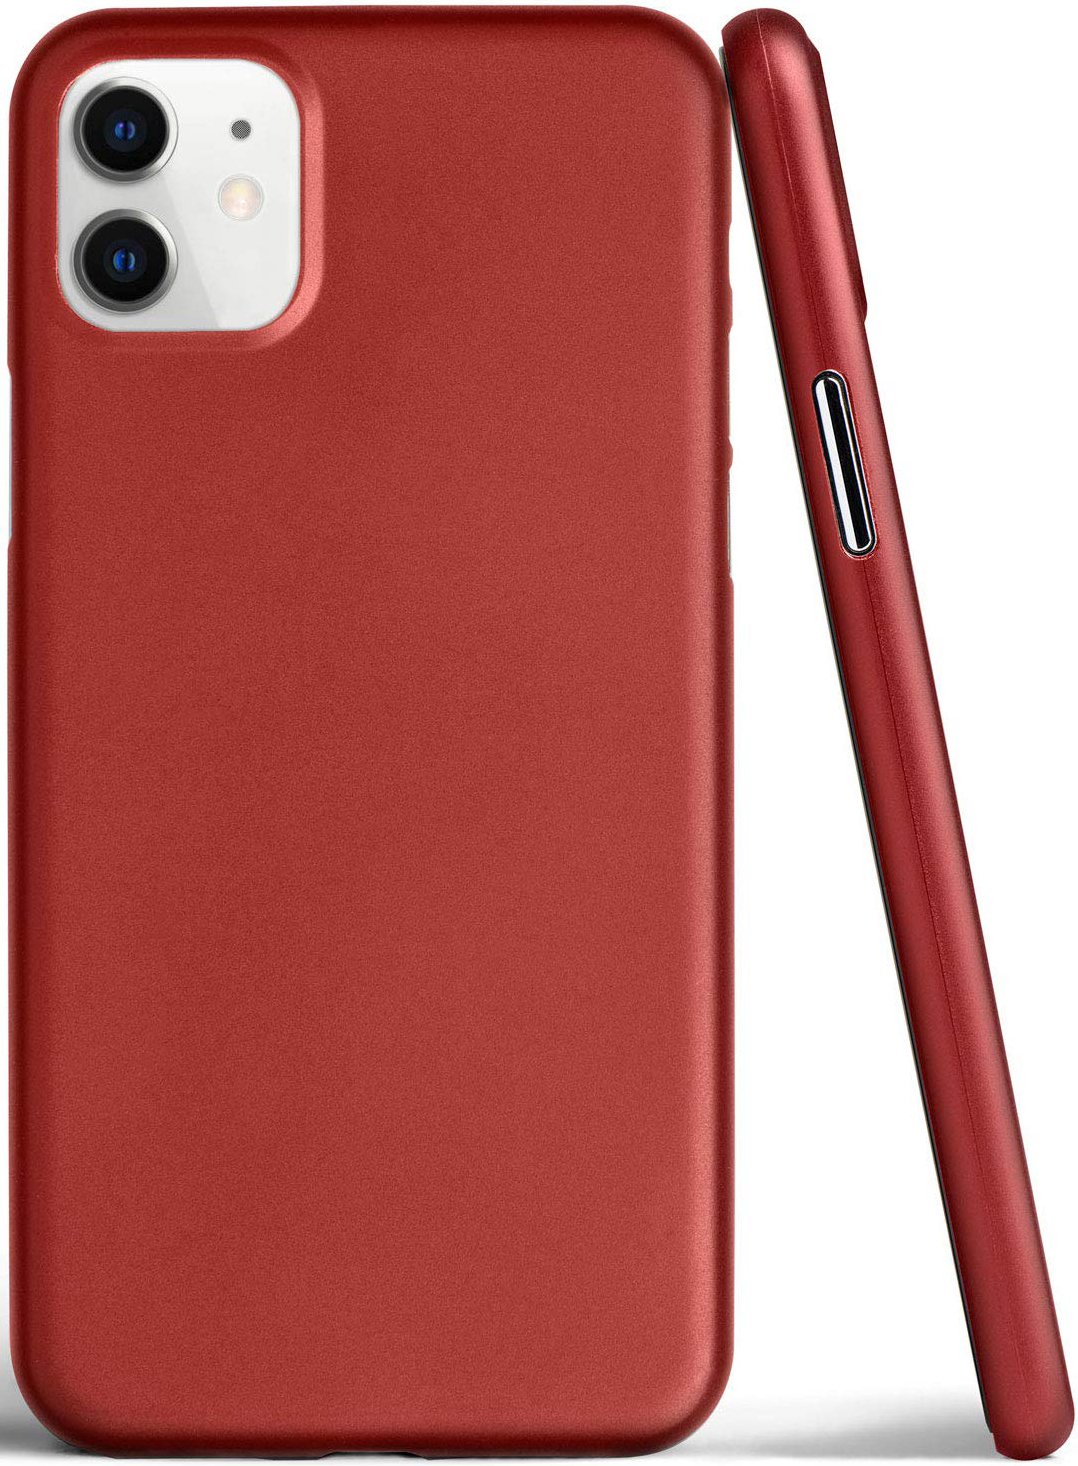 Totallee iPhone 11 case